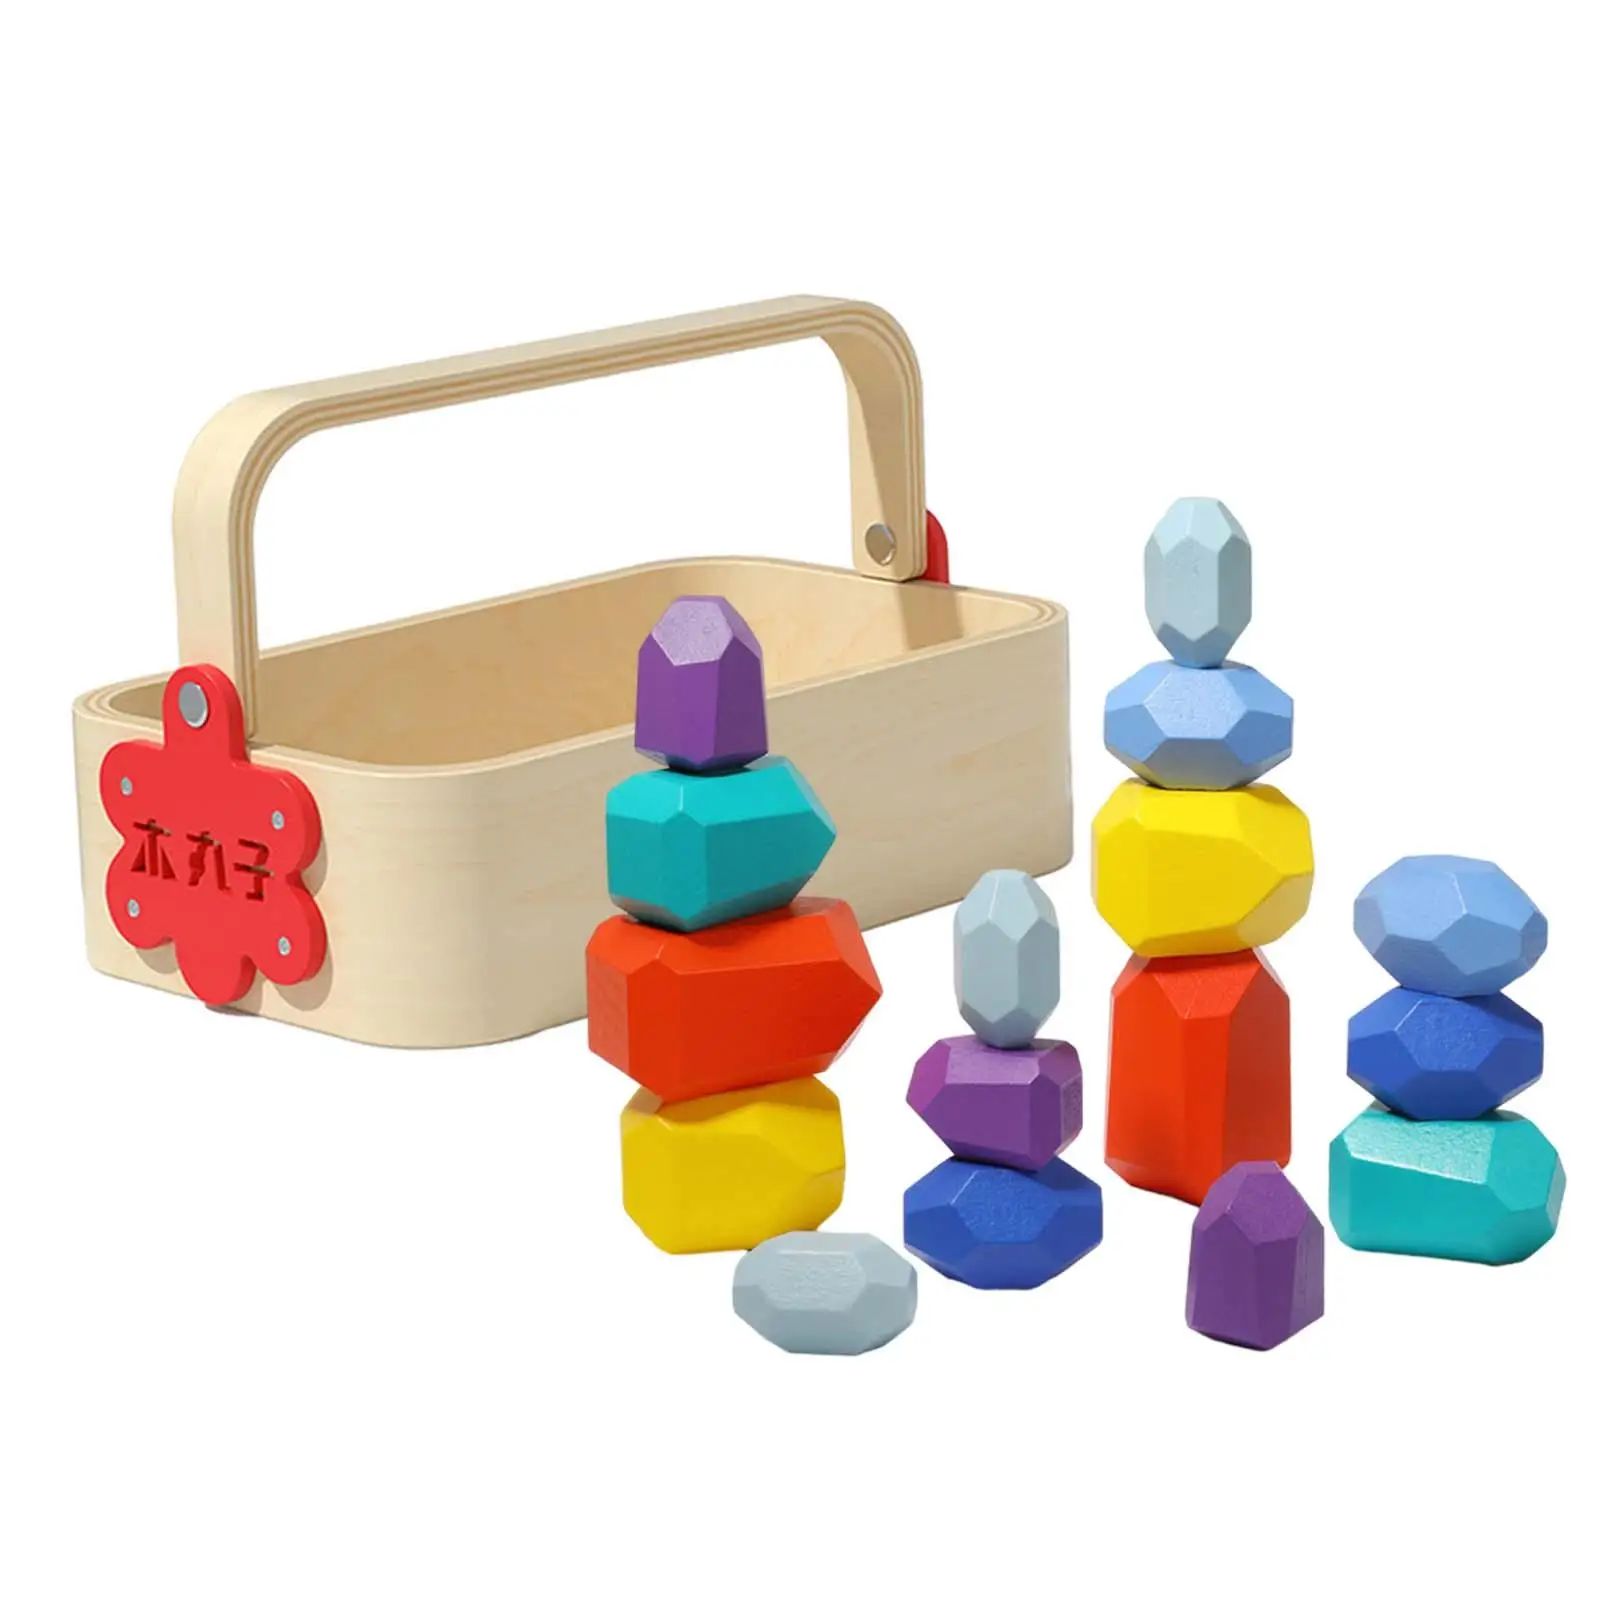 Stacking Blocks Hands on Puzzle Toys with Storage Case Balance Stones Wood for Girls Boys Children Kid 3 Years up Birthday Gifts